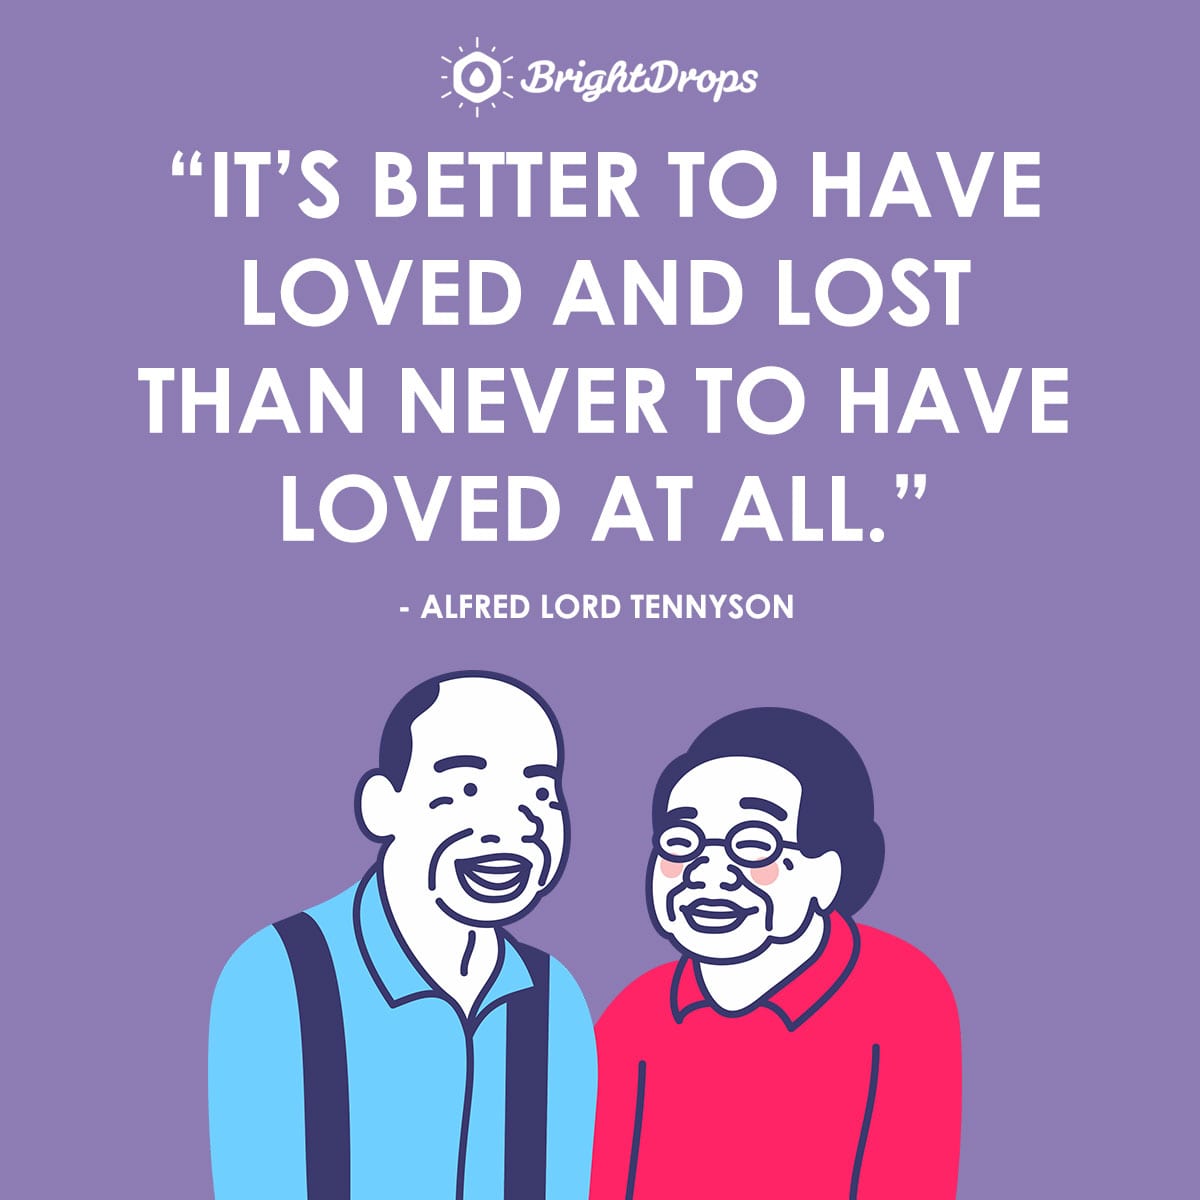 Lost Love Quotes